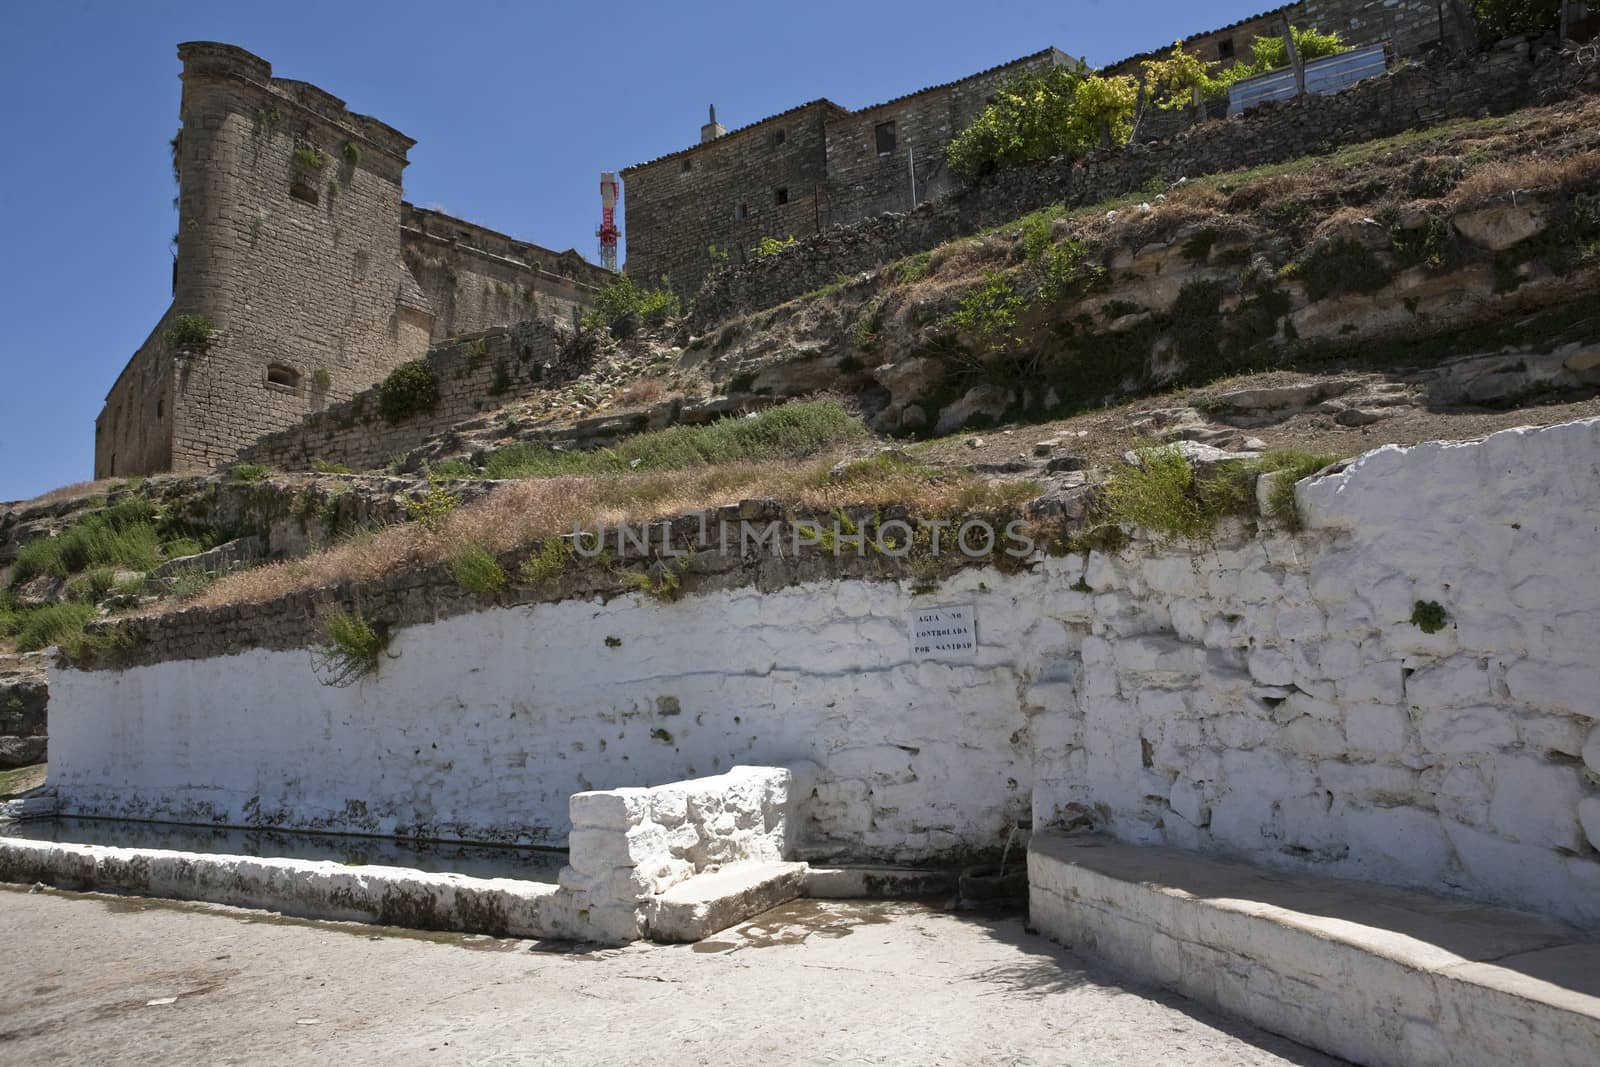 Castle of Sabiote and source, Jaen province, Andalusia, Spain